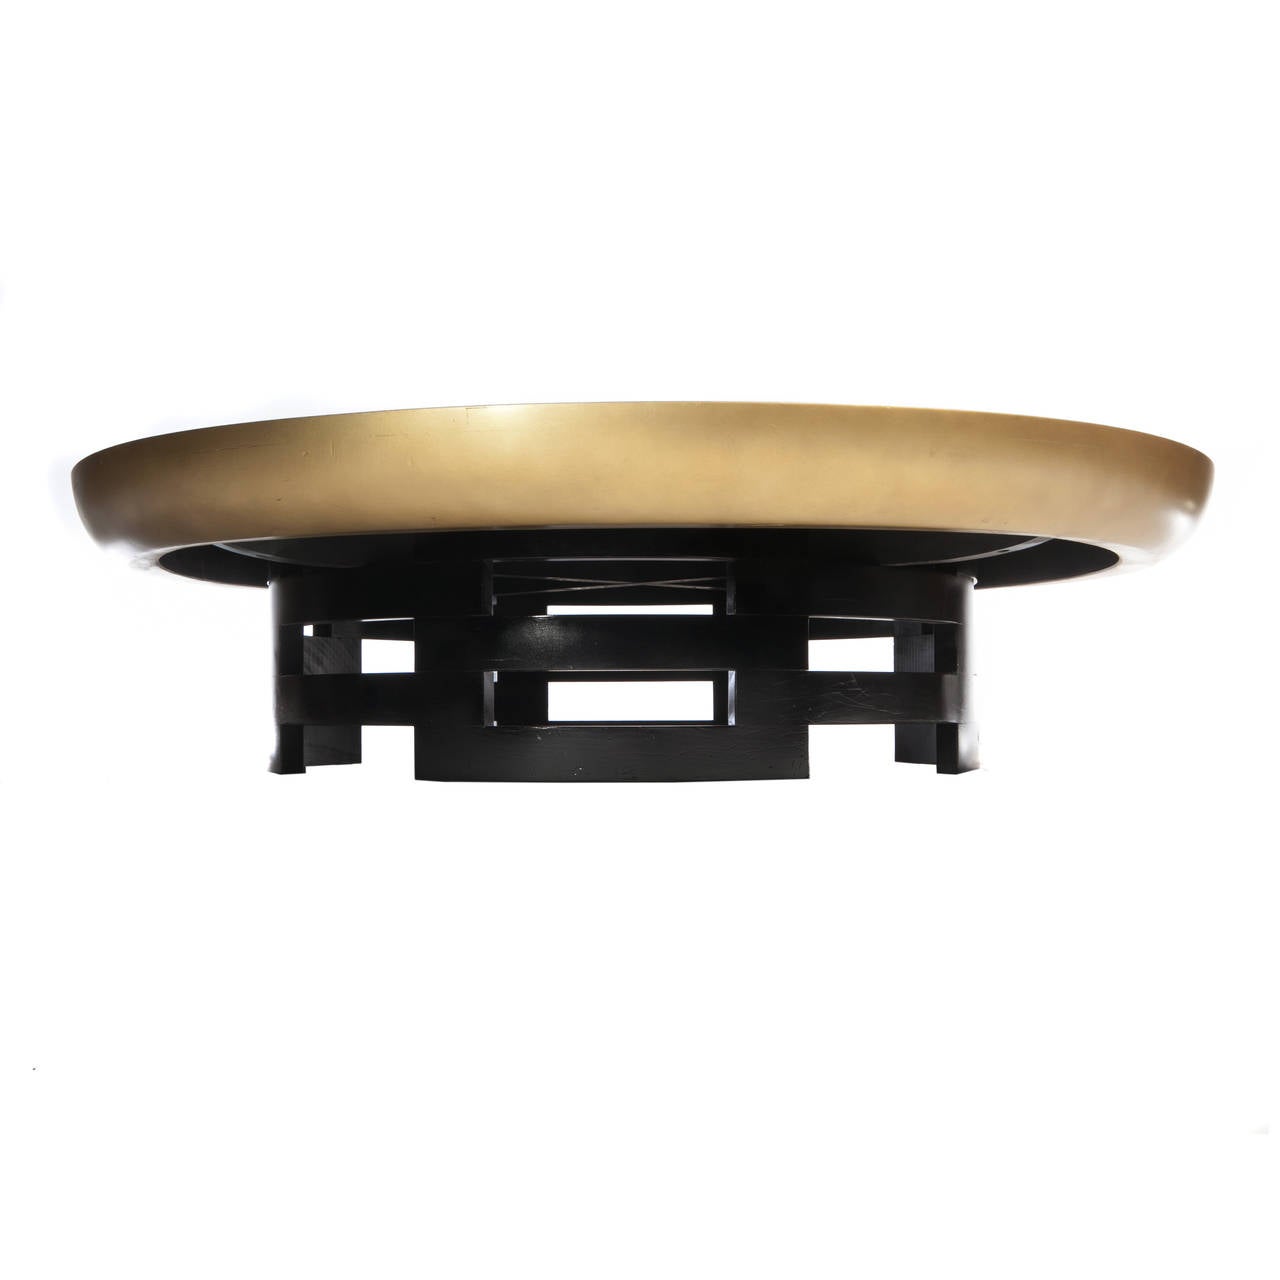 Mid-20th Century Lotus Coffee Table by Muller and Barringer for Kittinger